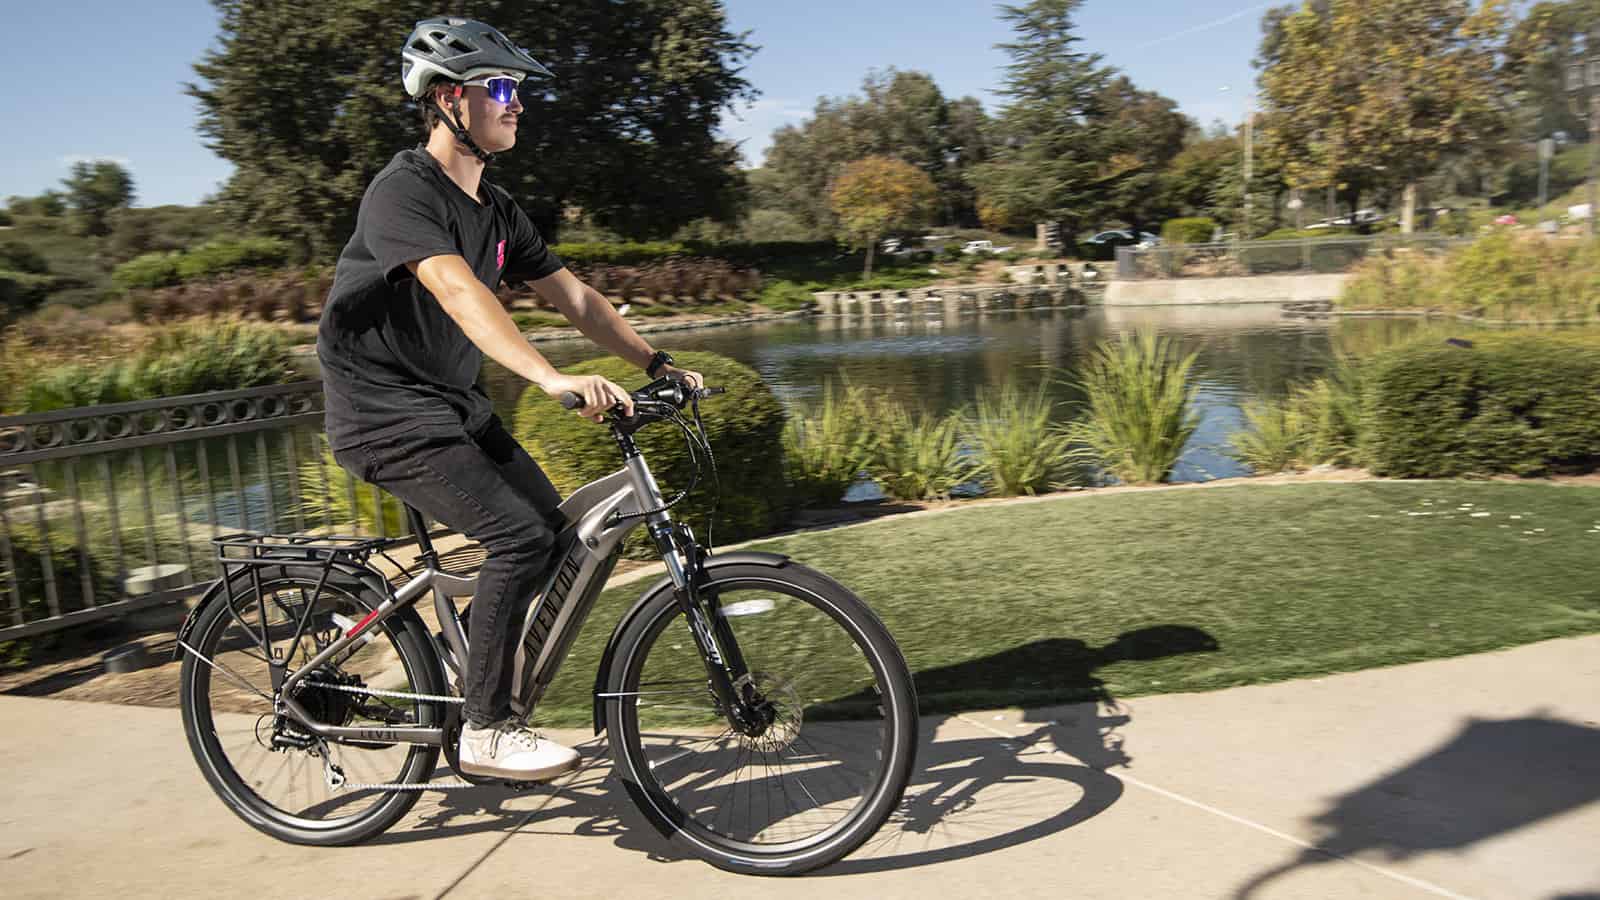 Man wearing black shirt and pants, riding an E-bike with a pond in the background